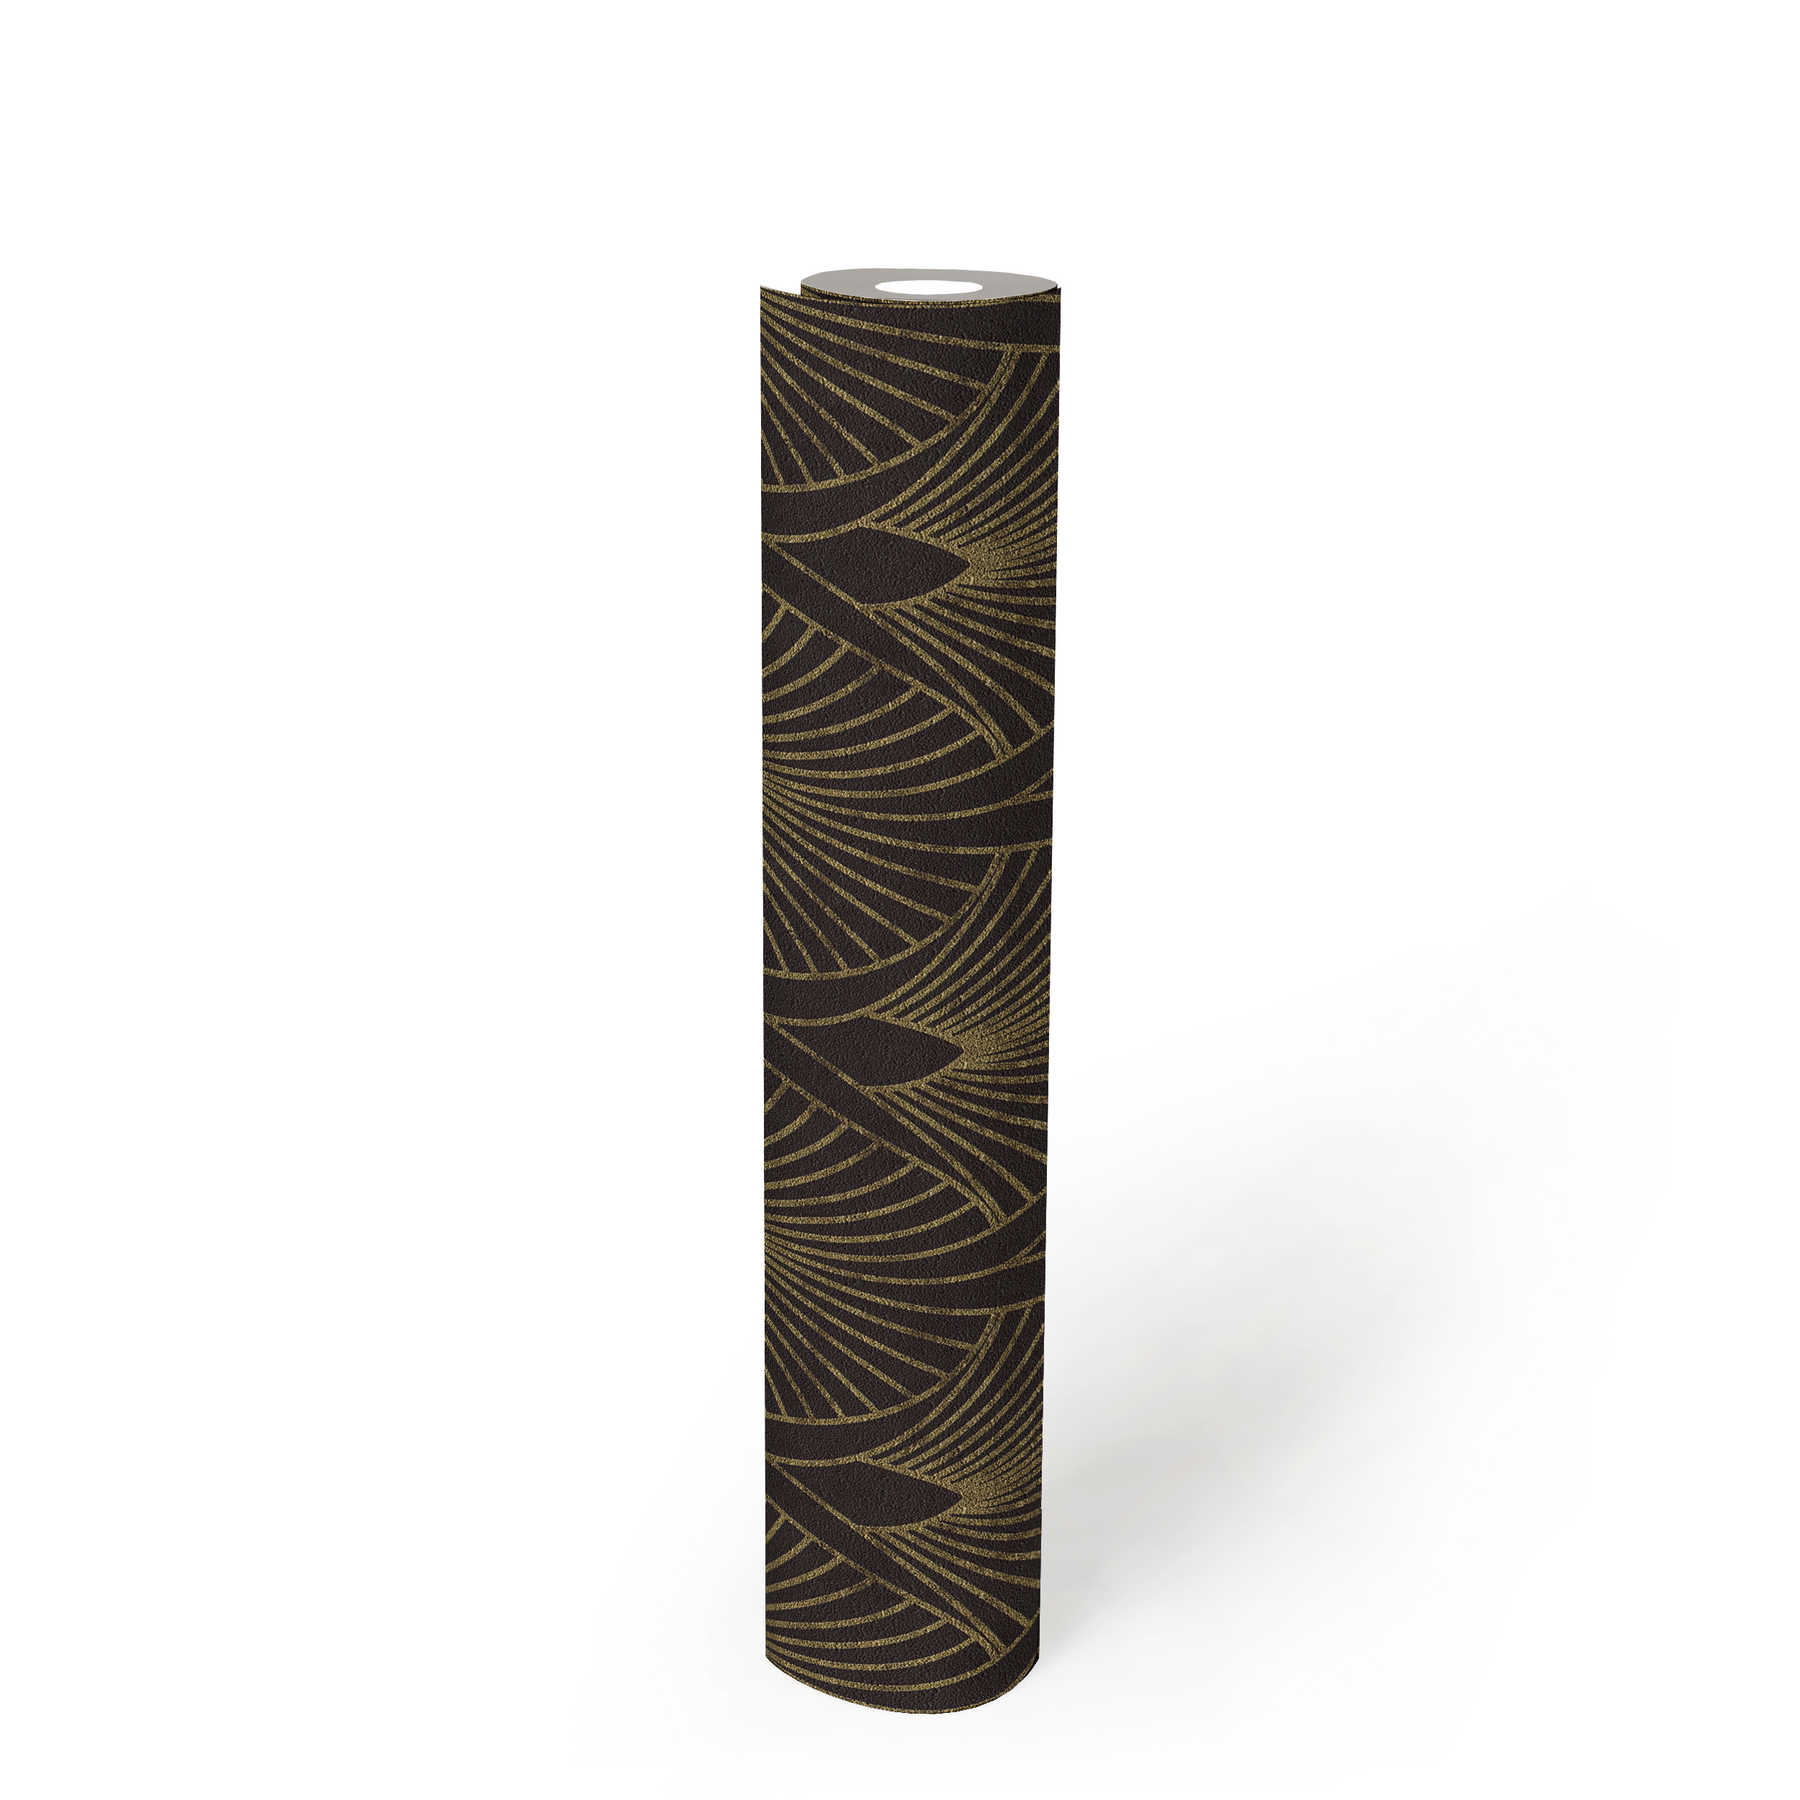             Art deco wallpaper with gold accents - black, gold
        